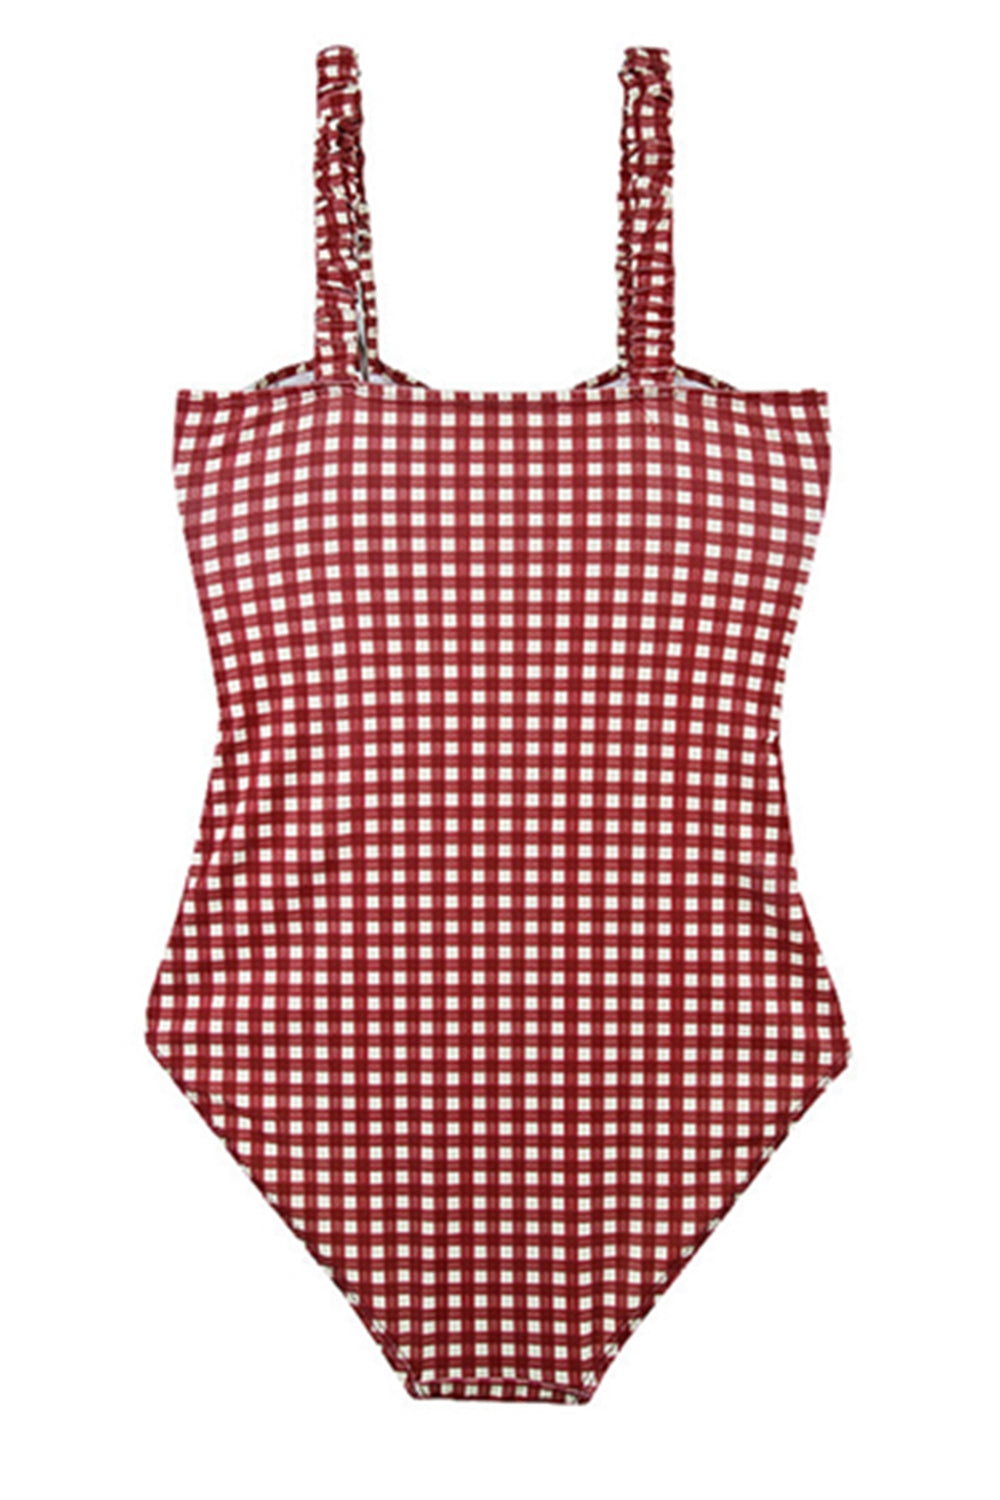 Iyasson Red Plaid Vintage Girl One Piece Swimsuit